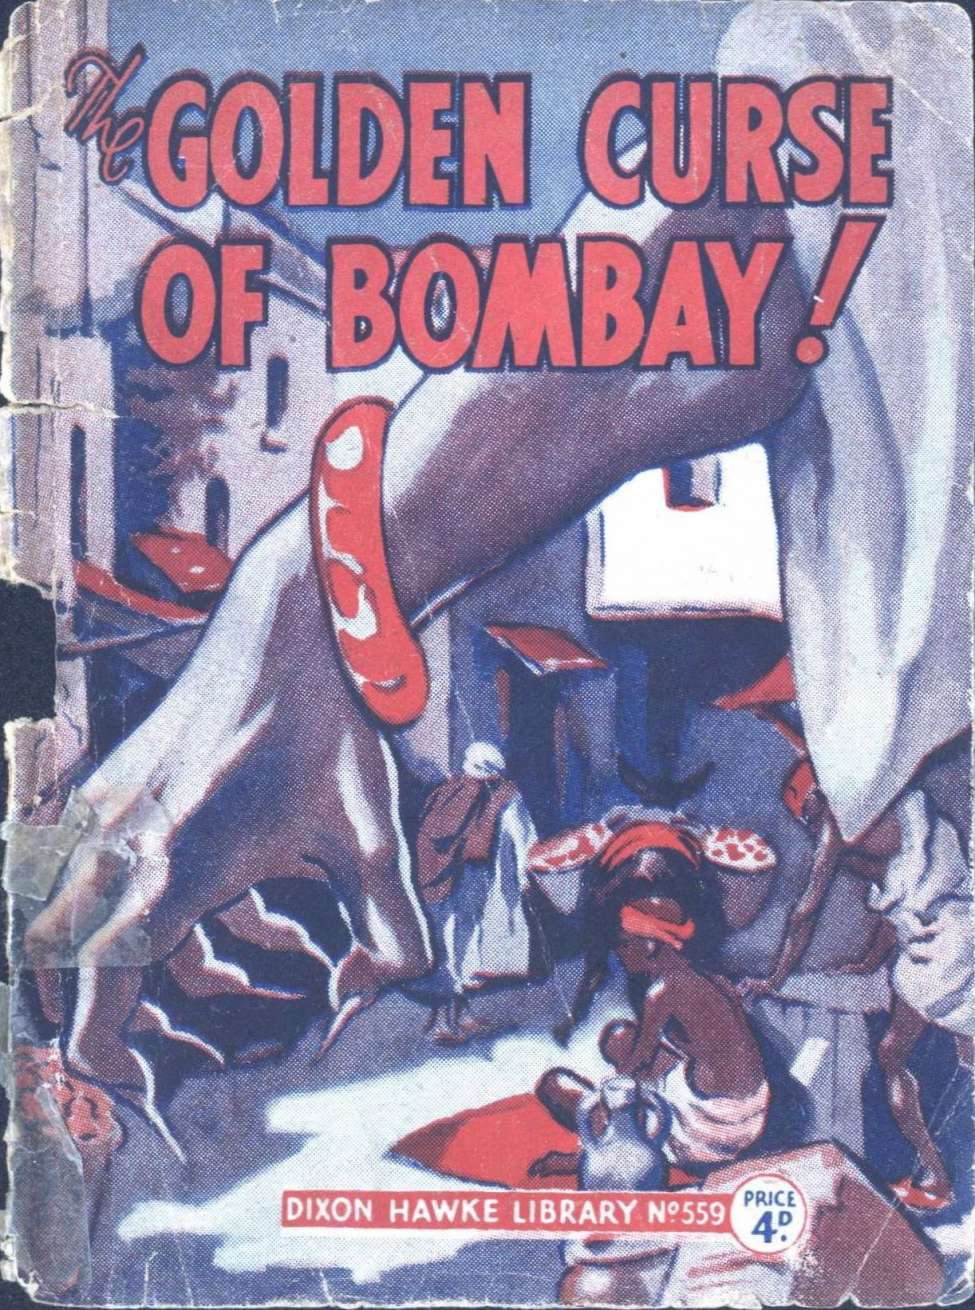 Comic Book Cover For Dixon Hawke Library 559 = The Golden Curse of Bombay